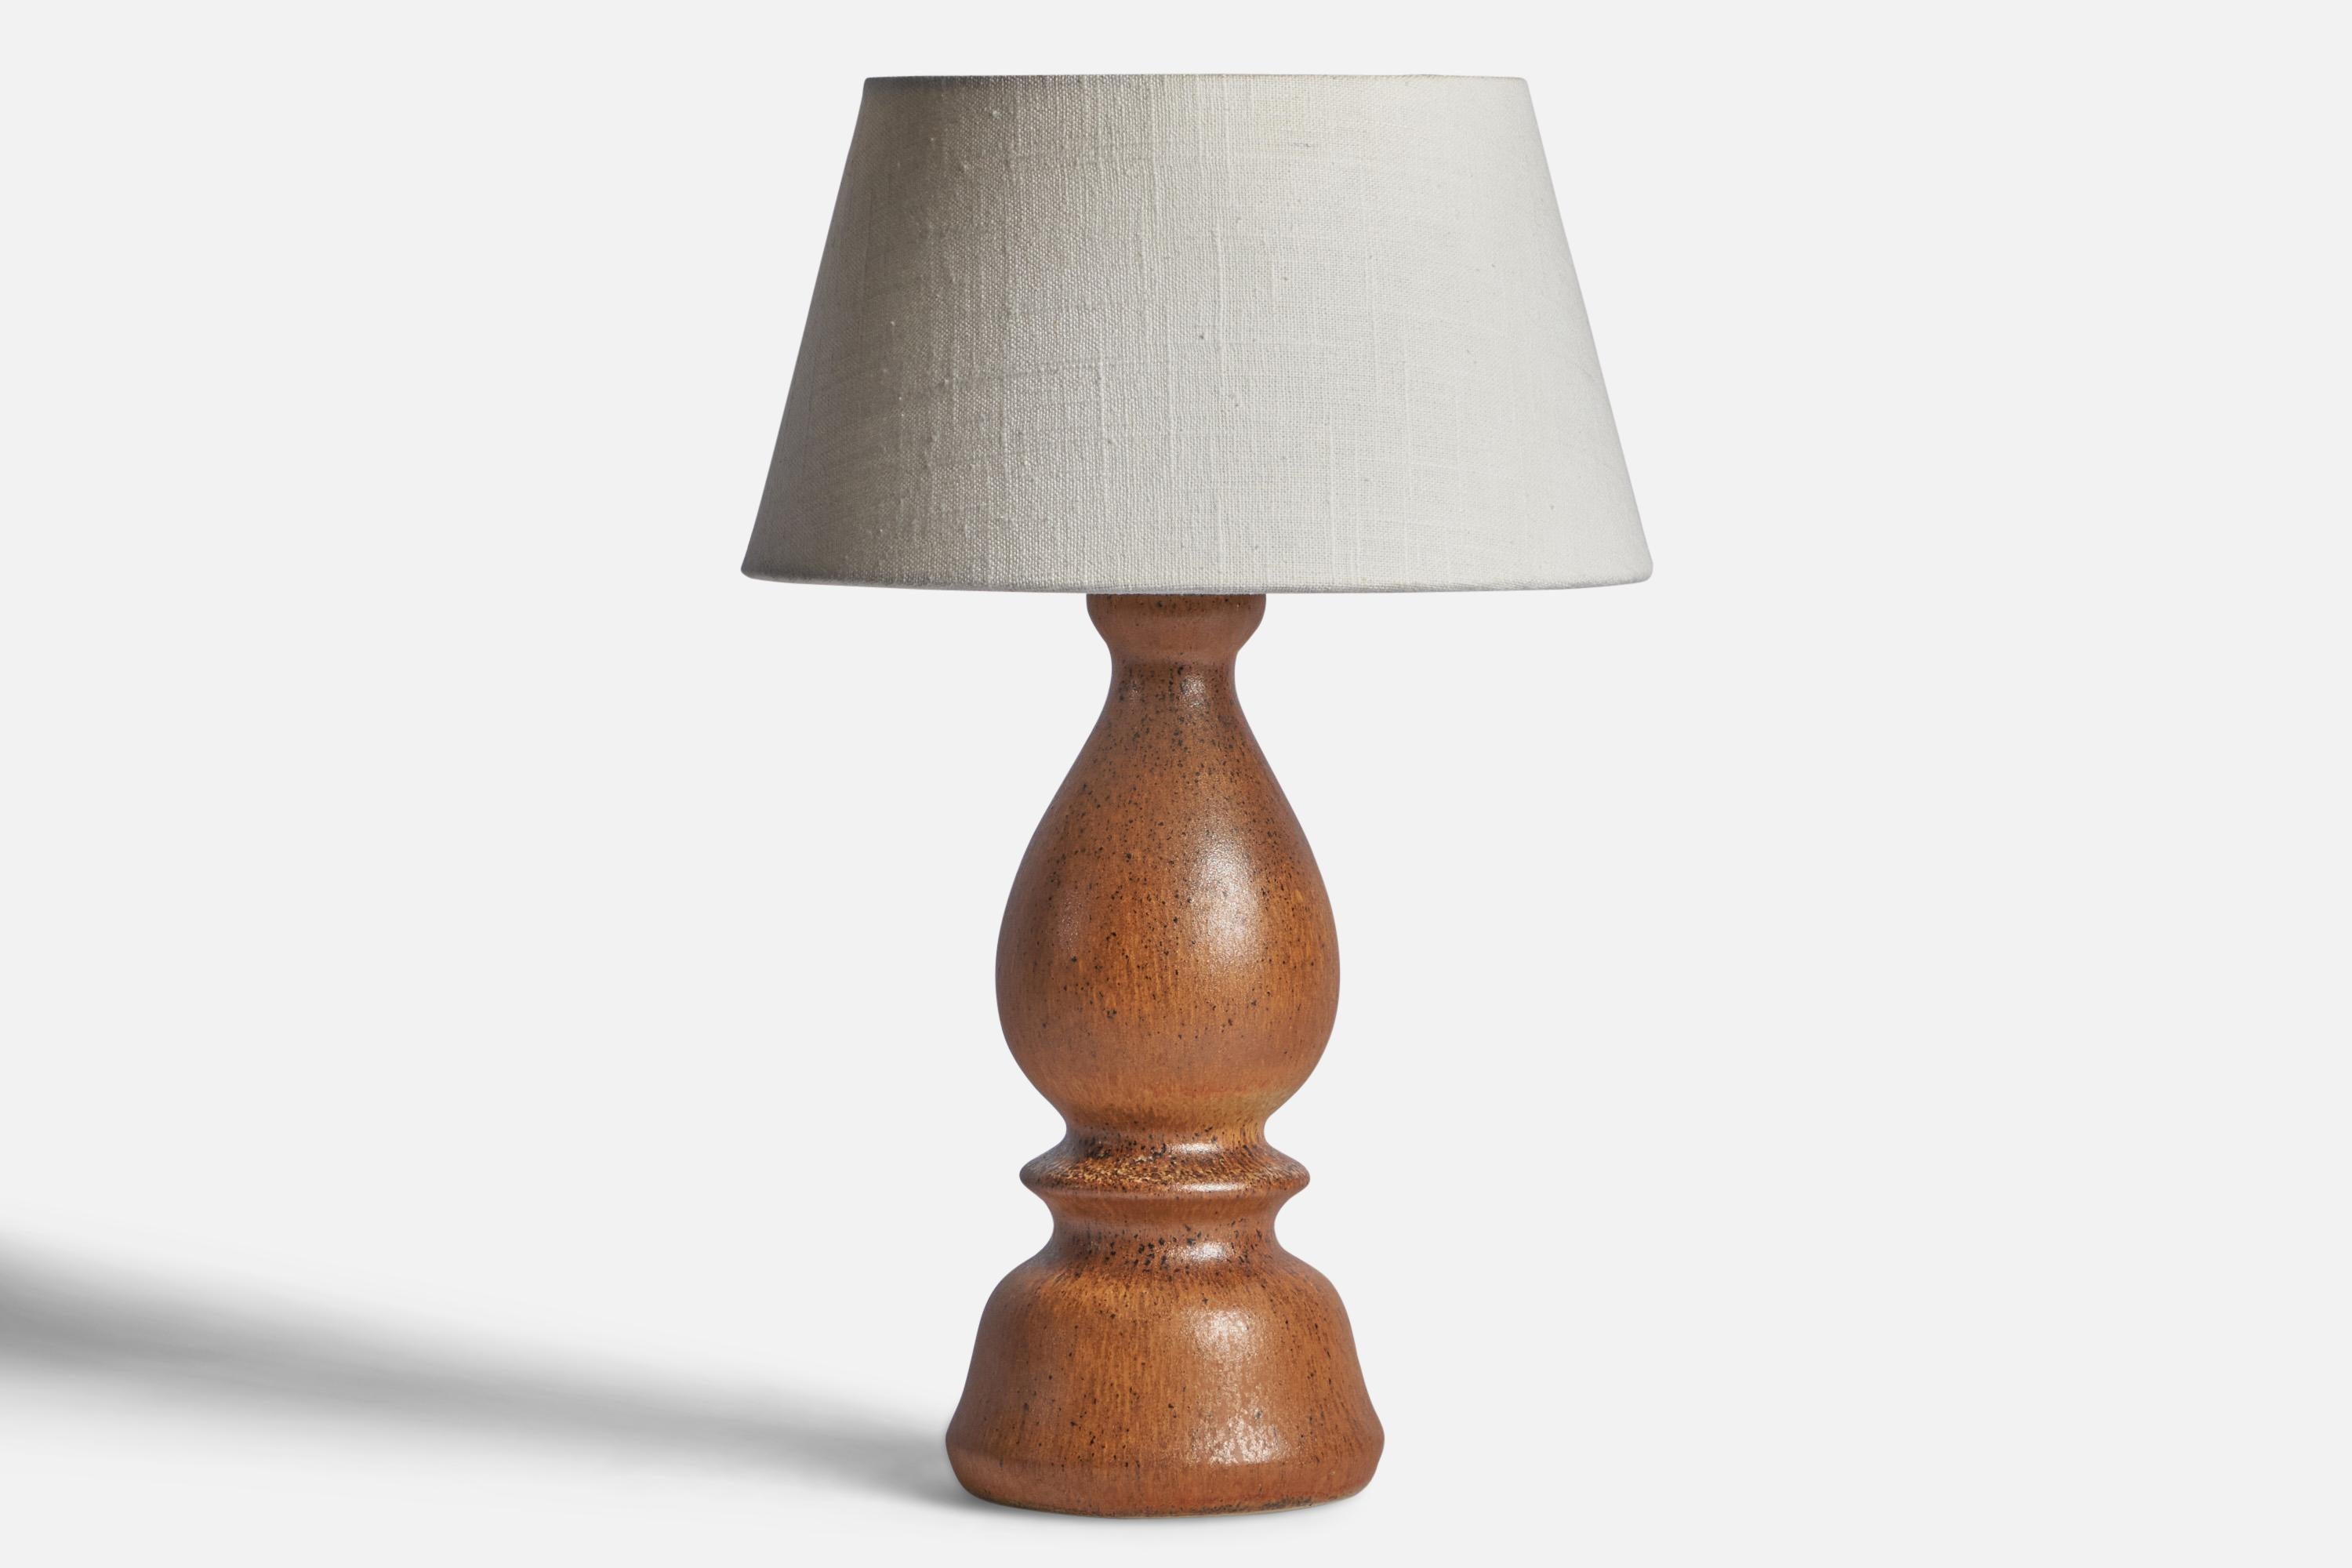 A brown-glazed stoneware table lamp designed by Bruno Karlsson and produced by Ego Stengods, Sweden, c. 1960s.

Dimensions of Lamp (inches): 12.5” H x 5” Diameter

Dimensions of Shade (inches): 7” Top Diameter x 10” Bottom Diameter x 5.5”